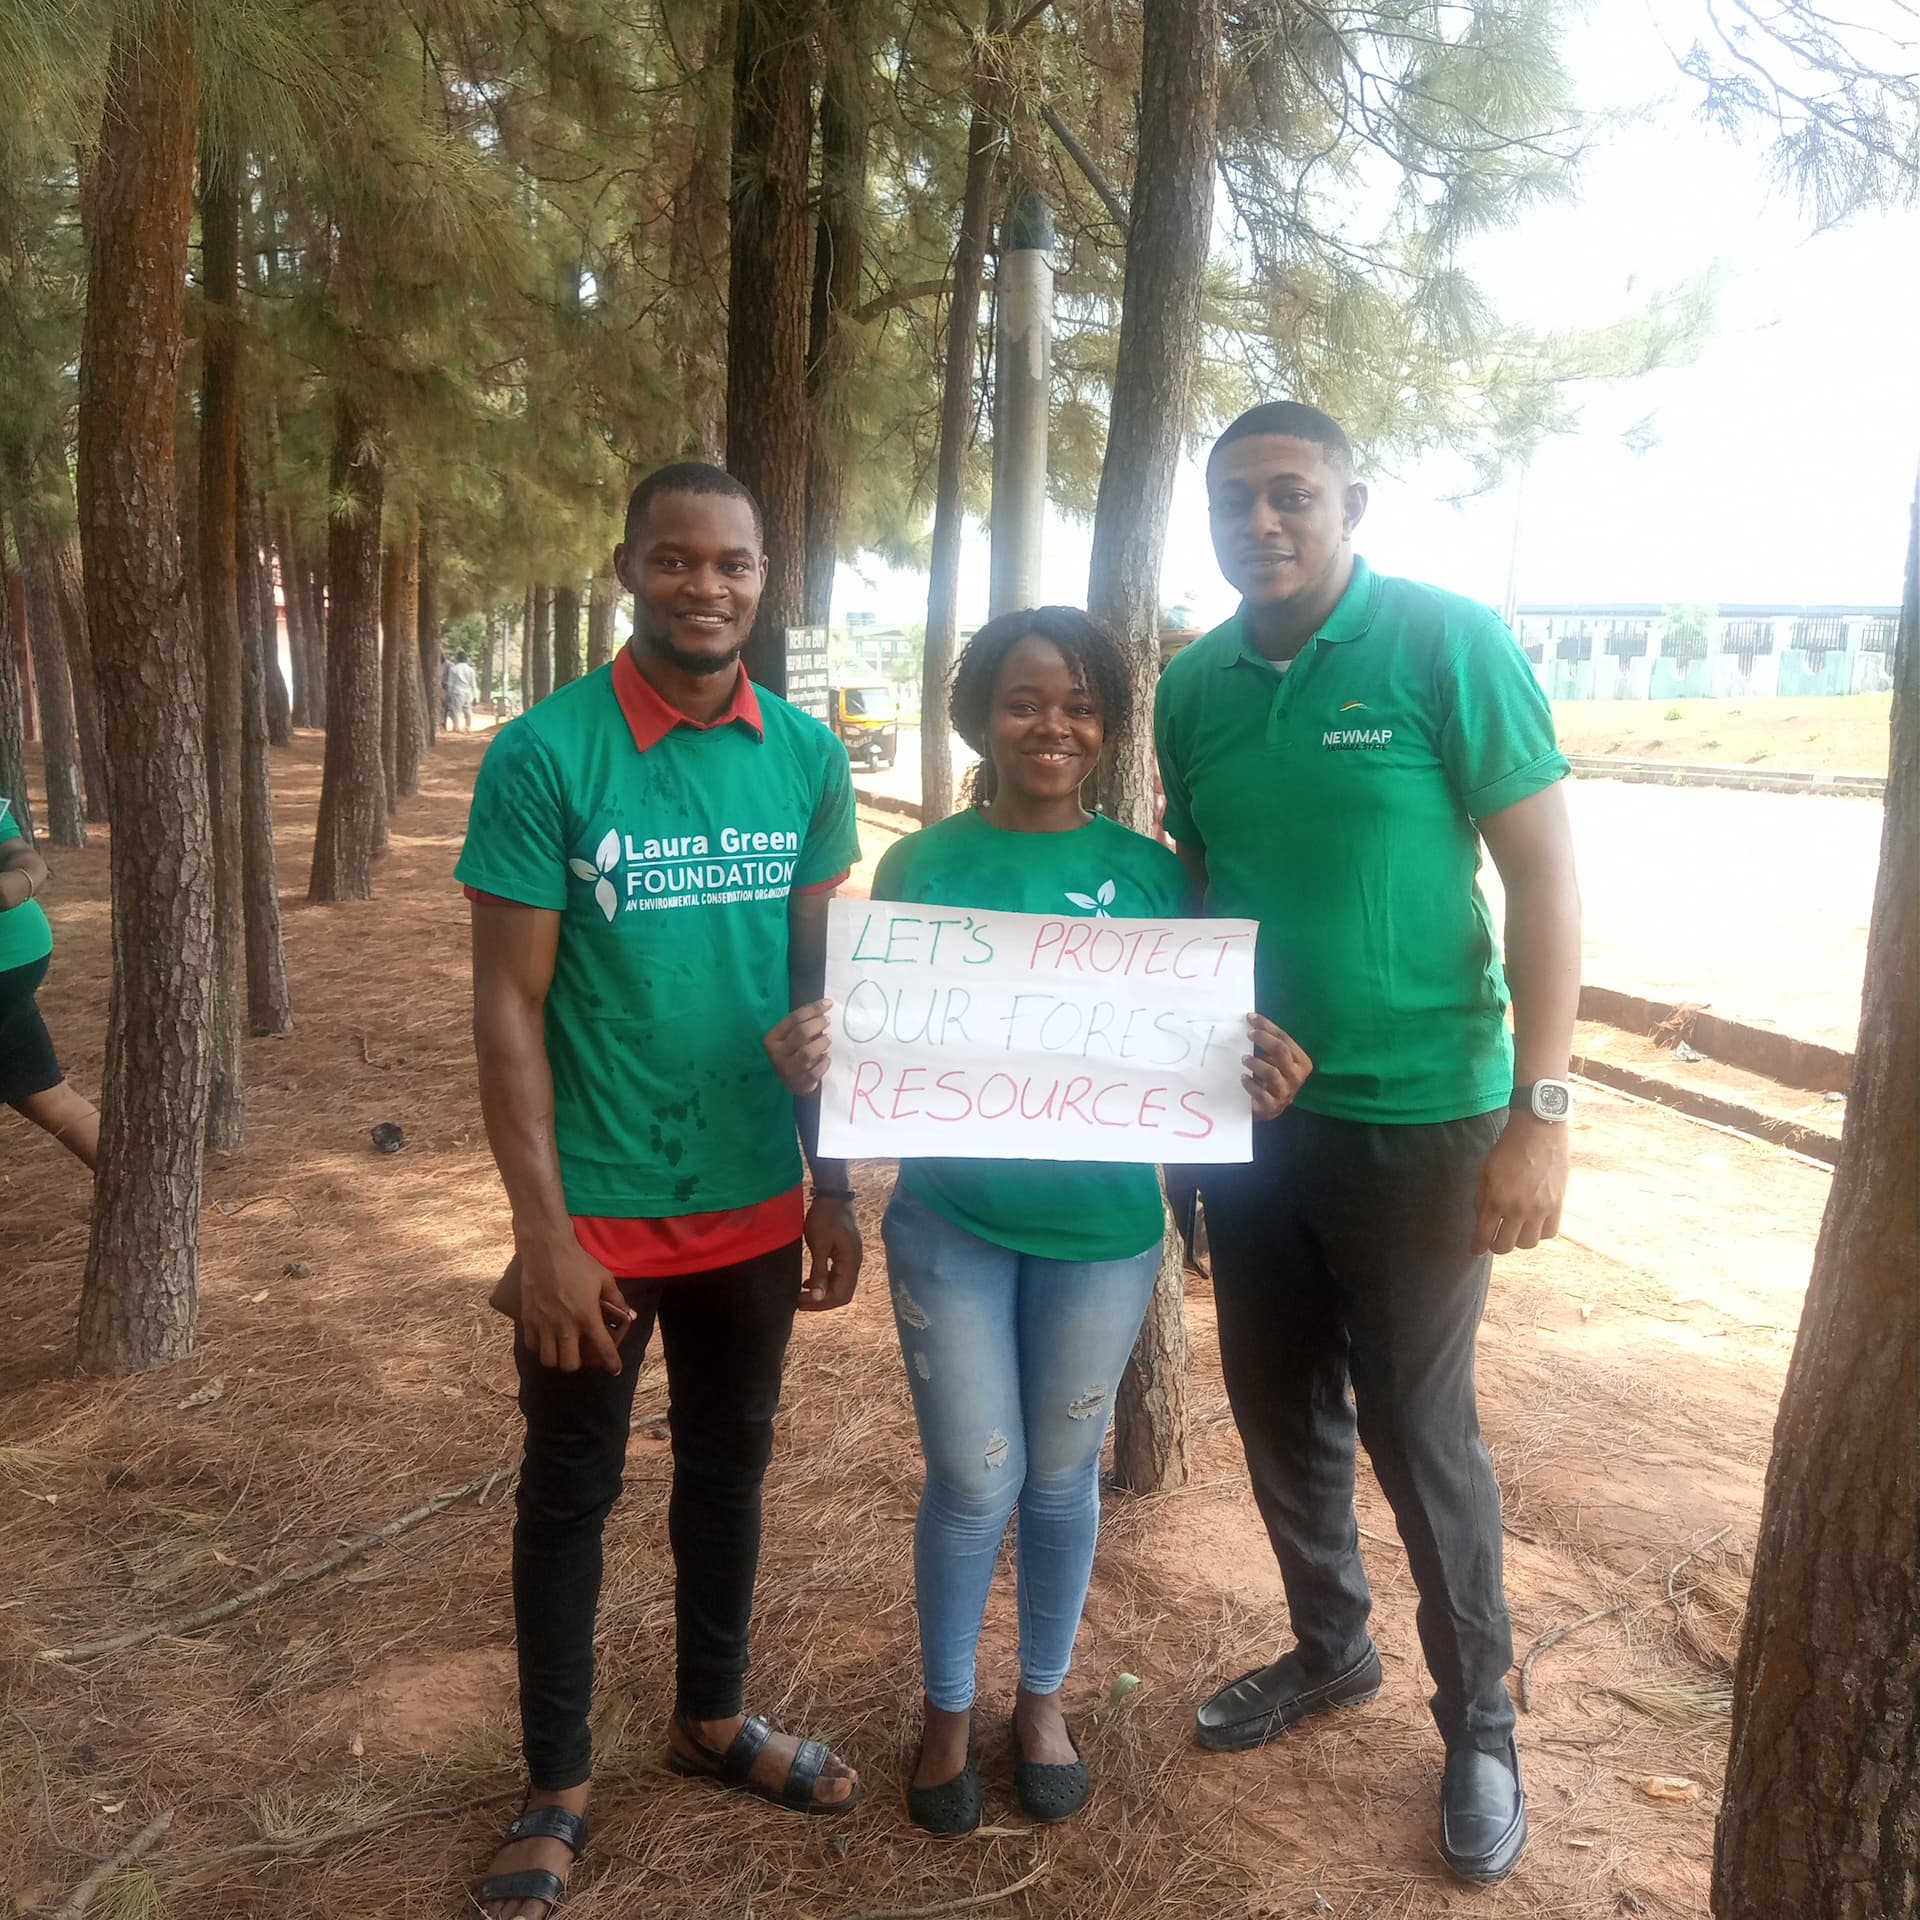 Mrs Mmachukwu Obimdike and fellow environmental enthusiast. Mrs Mmachukwu is holding a plaque that says Let us protect our forest resources